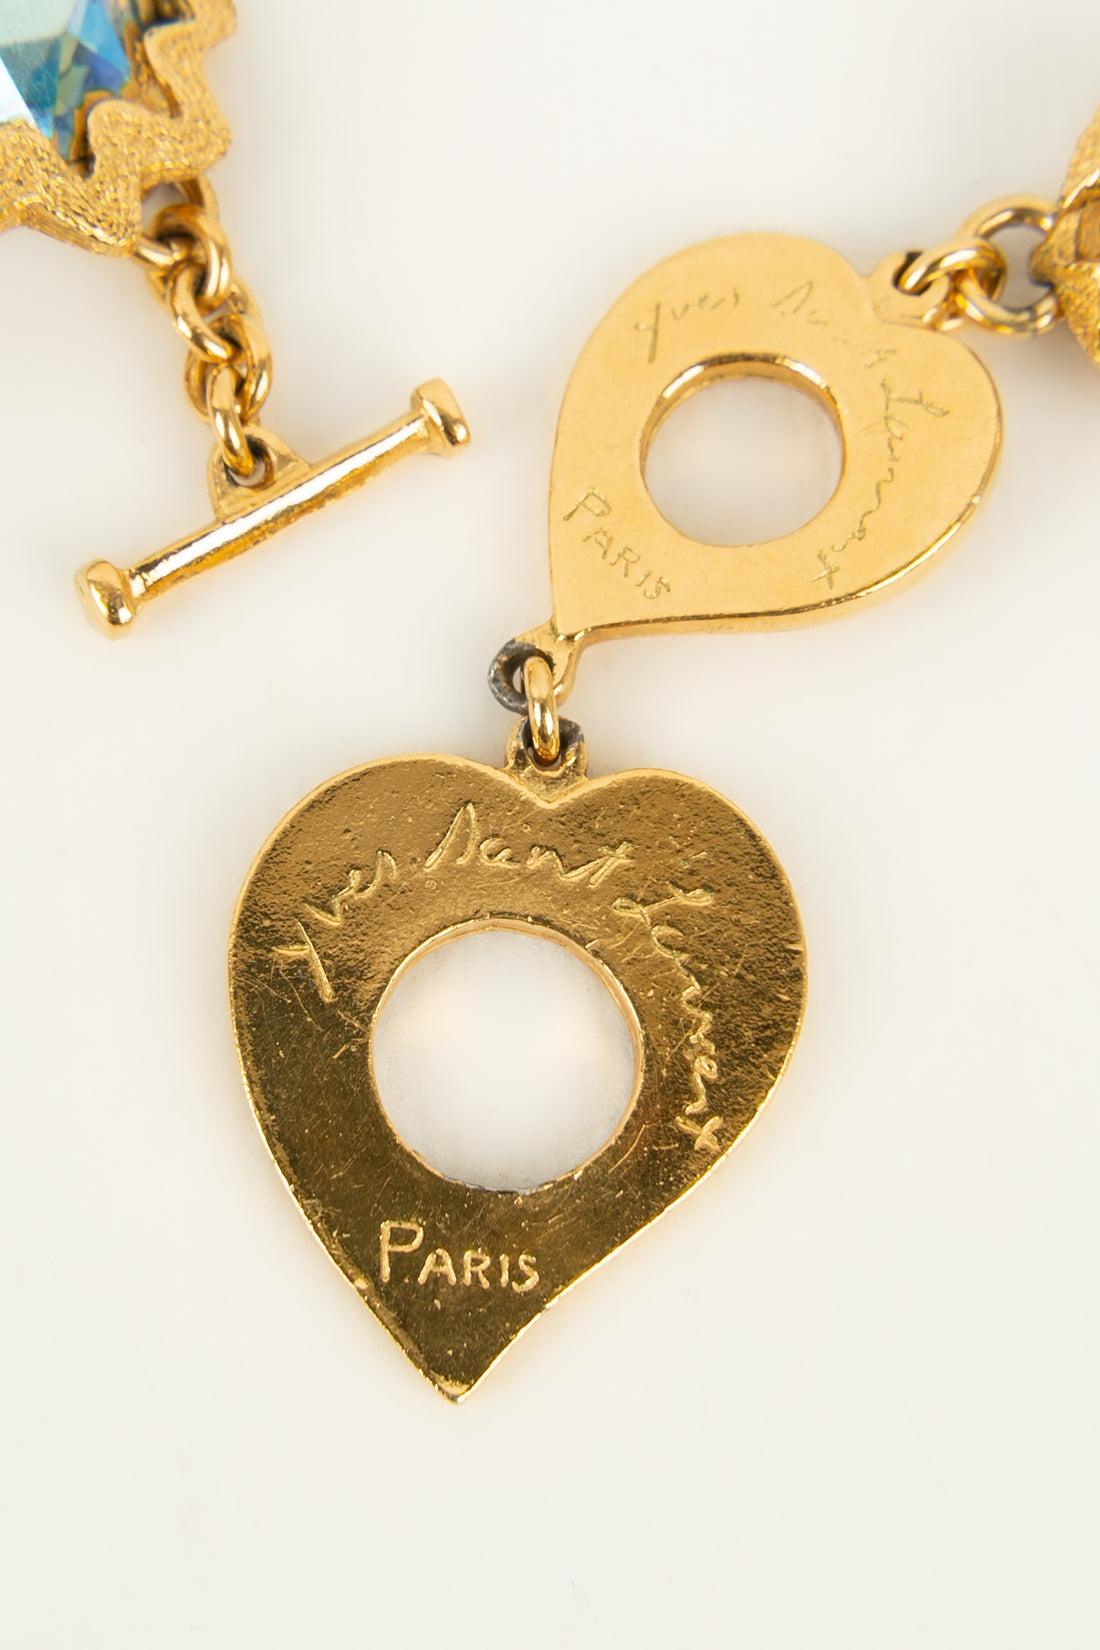 Yves Saint Laurent Short Necklace In Gold-Plated Metal and Rhinestones For Sale 3